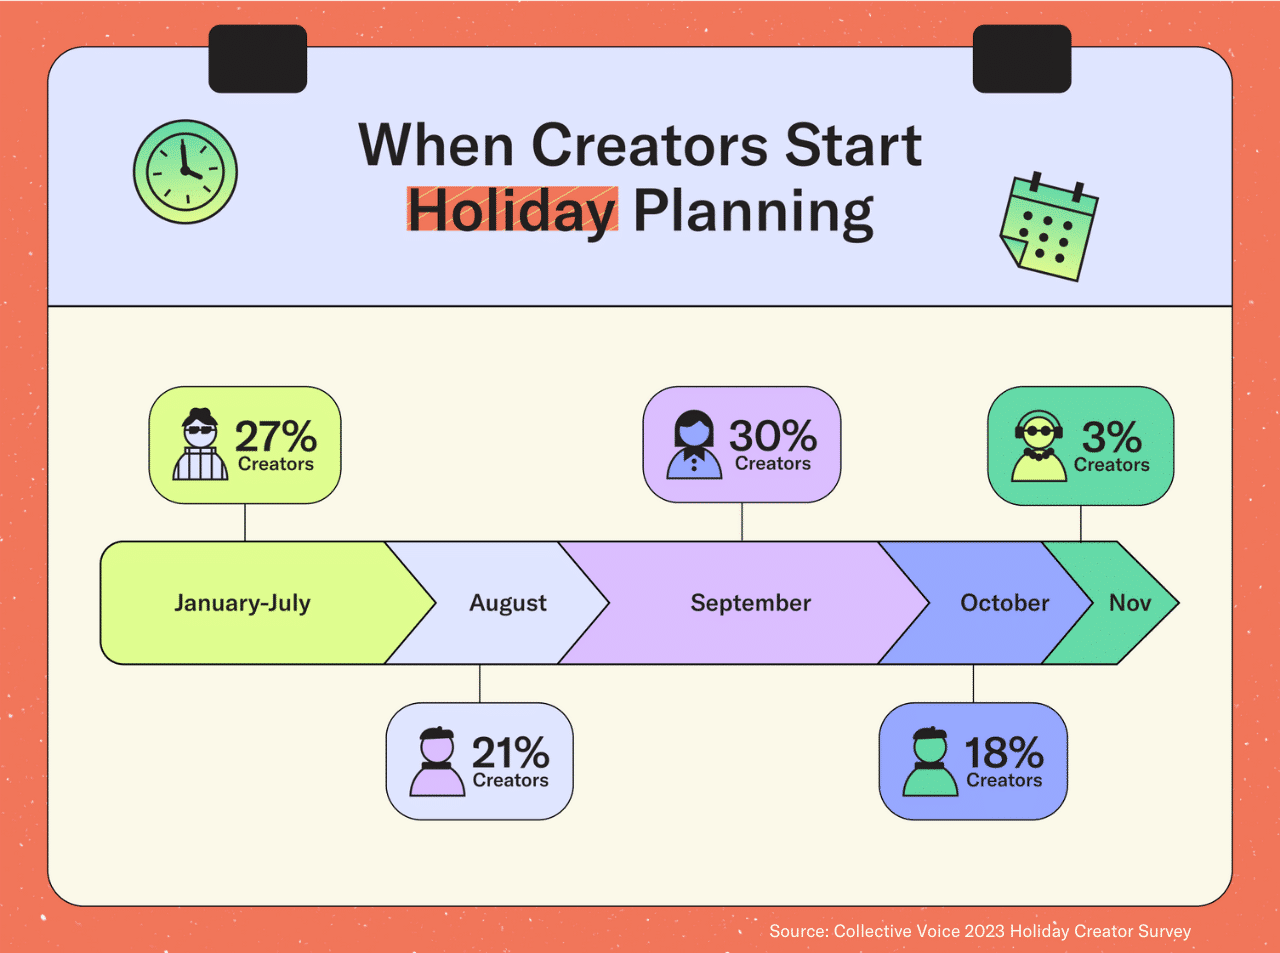 When creators and marketers start planning holiday content